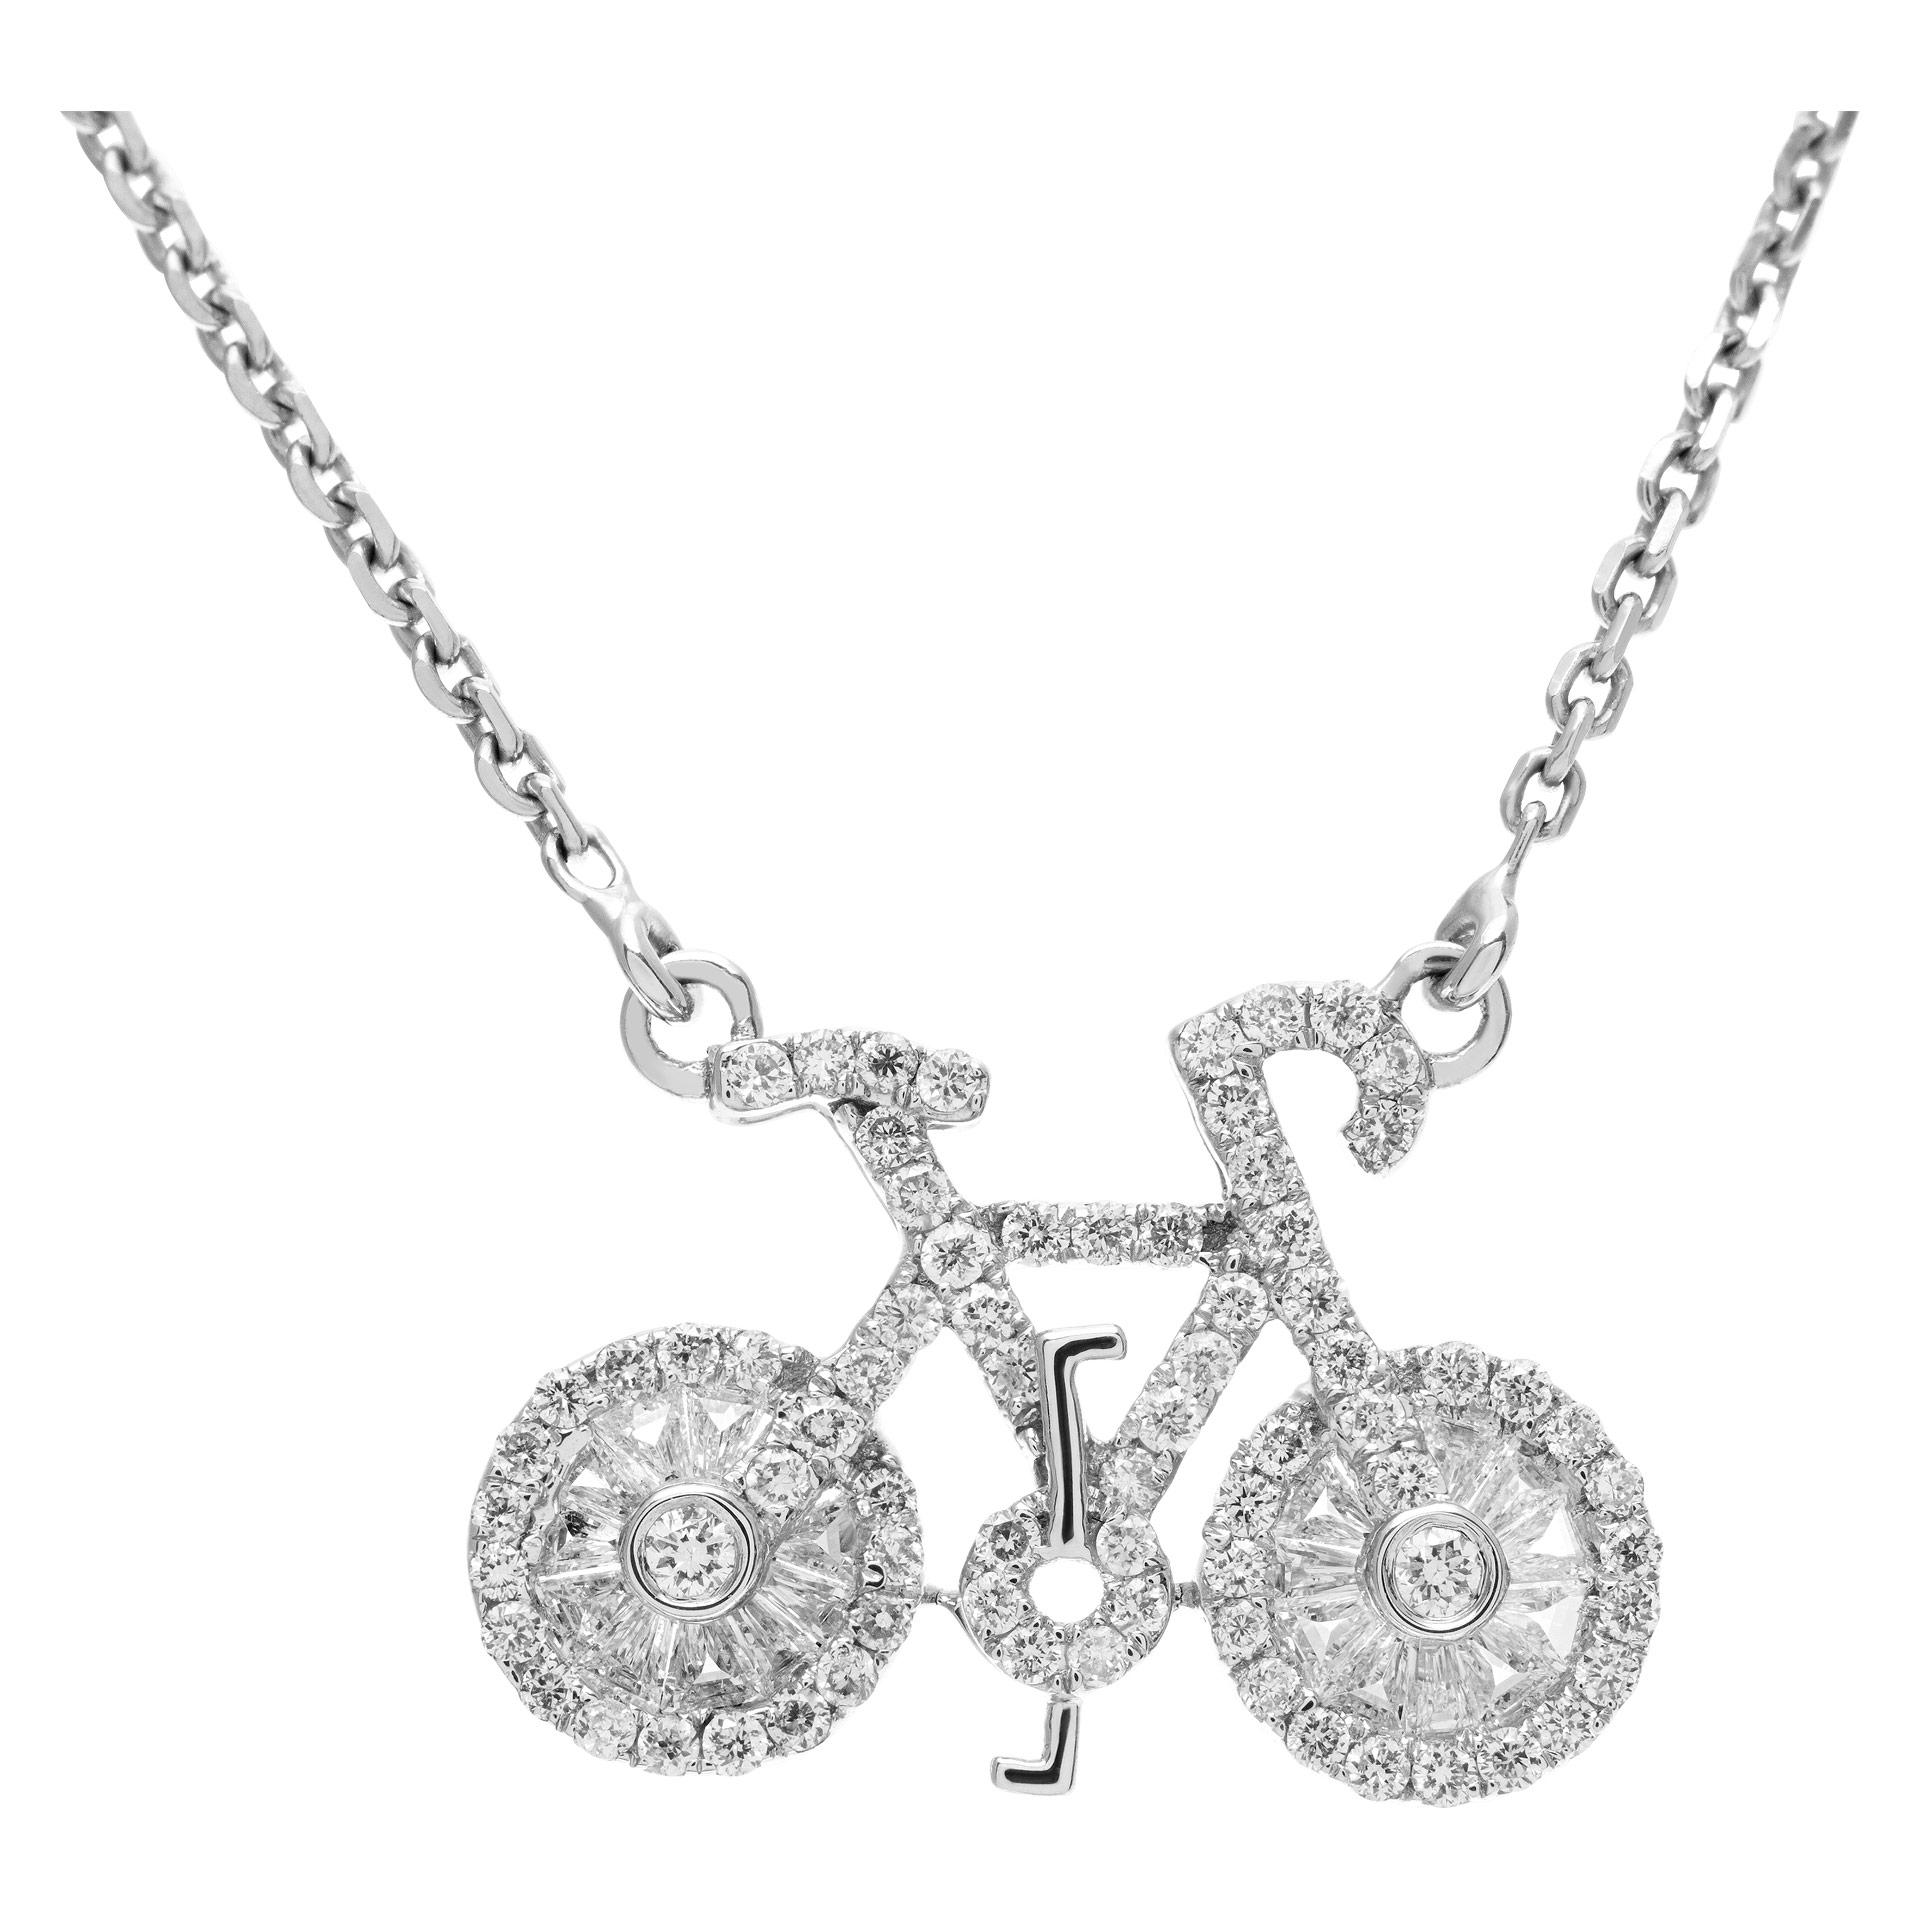 Pave diamond bicycle pendant necklace set in 18k white gold with approximately 0.35 carats of diamonds. The legth of the necklace can be 18'', 17'', or 16''.